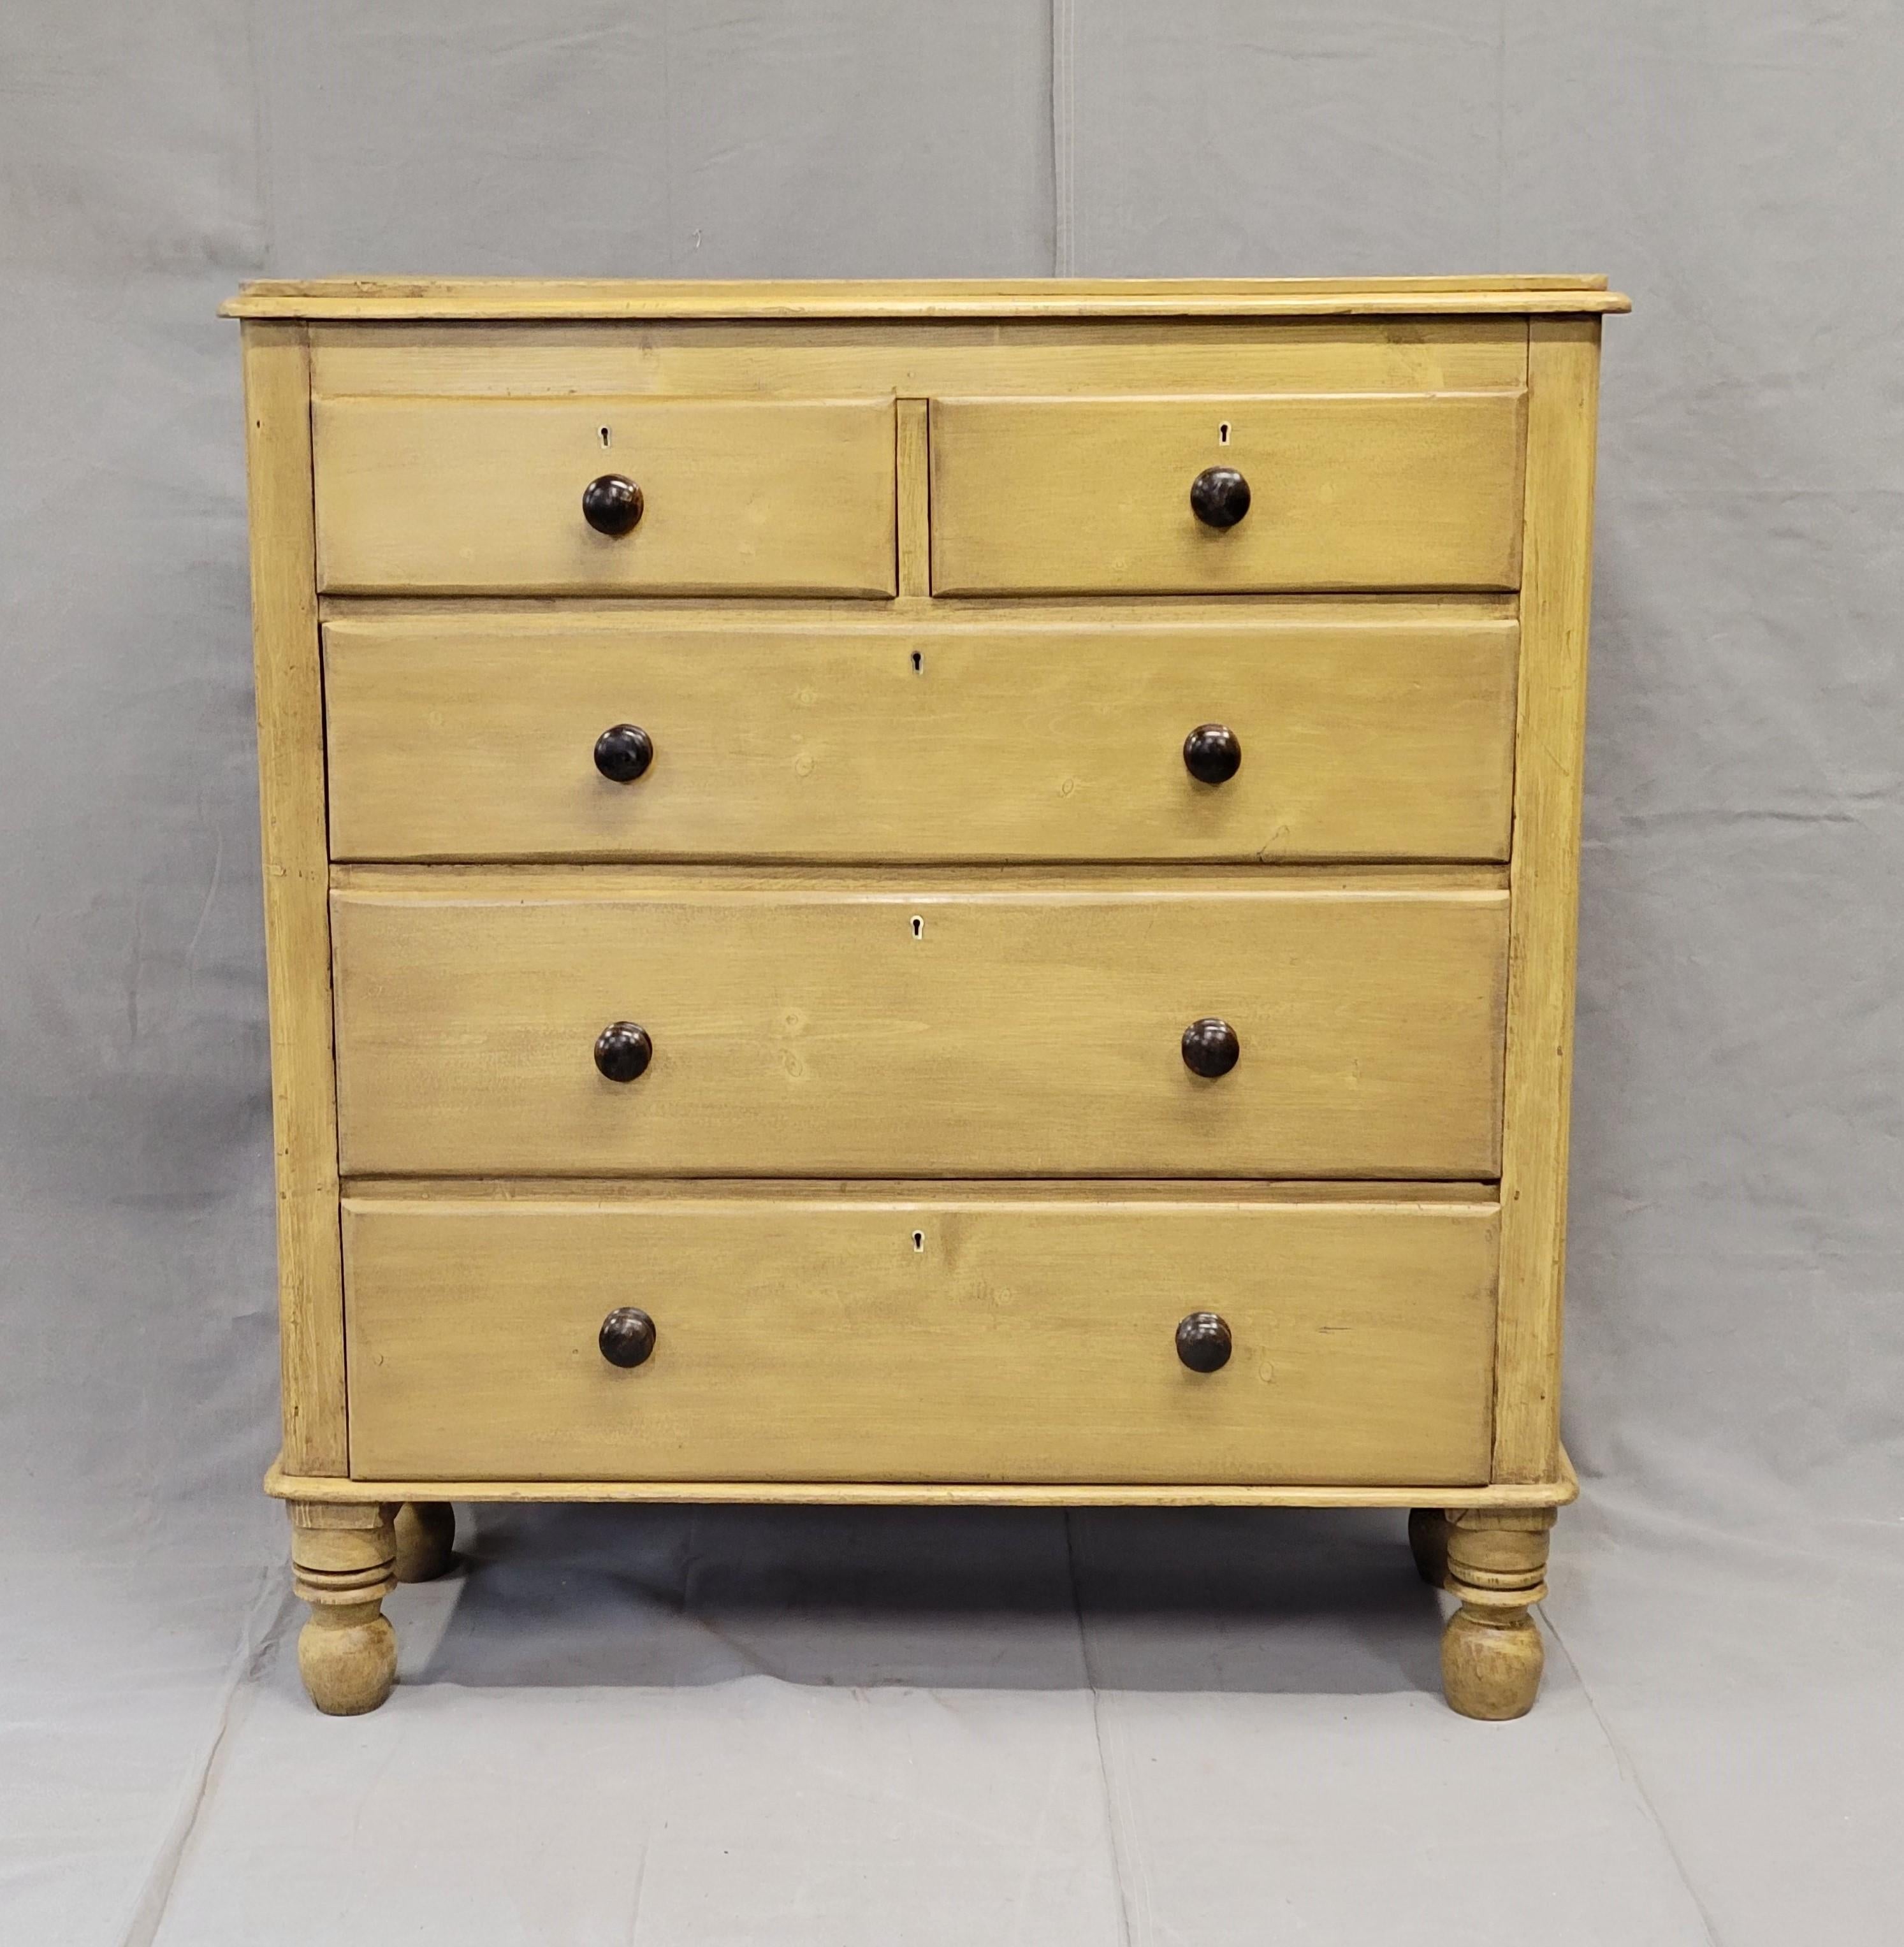 This Antique English Edwardian stately chest of drawers is made of pine and sits on oversize turned feet, adding a unique addition to your home decor. The dresser overall has the appearance of natural pine but when you look closely you realize it is